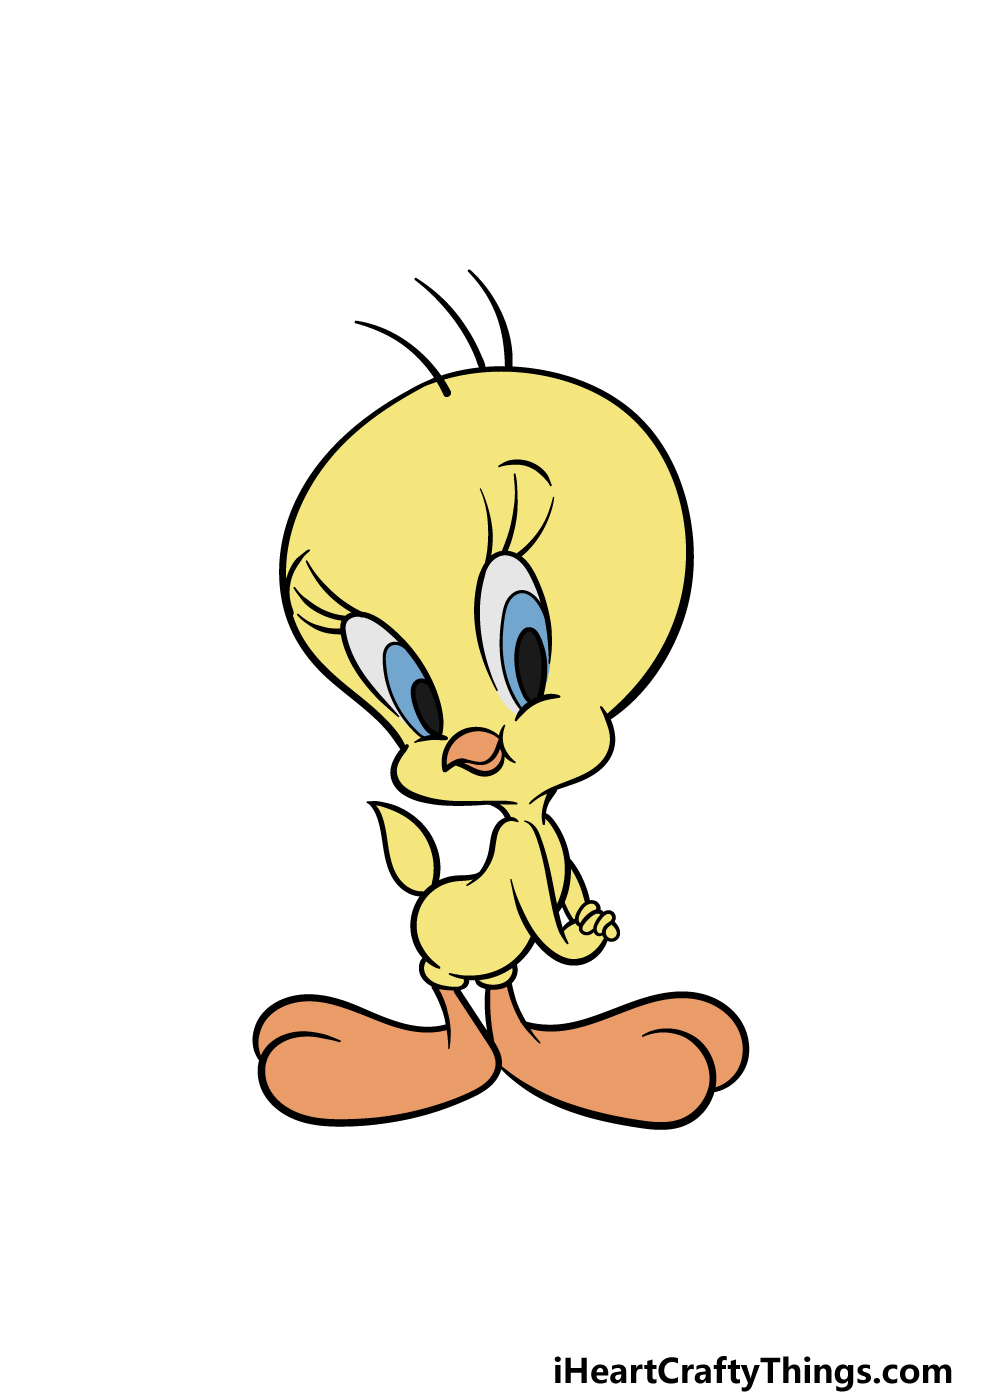 How to Draw Christmas Tweety in Santa's Suit Step-by-Step